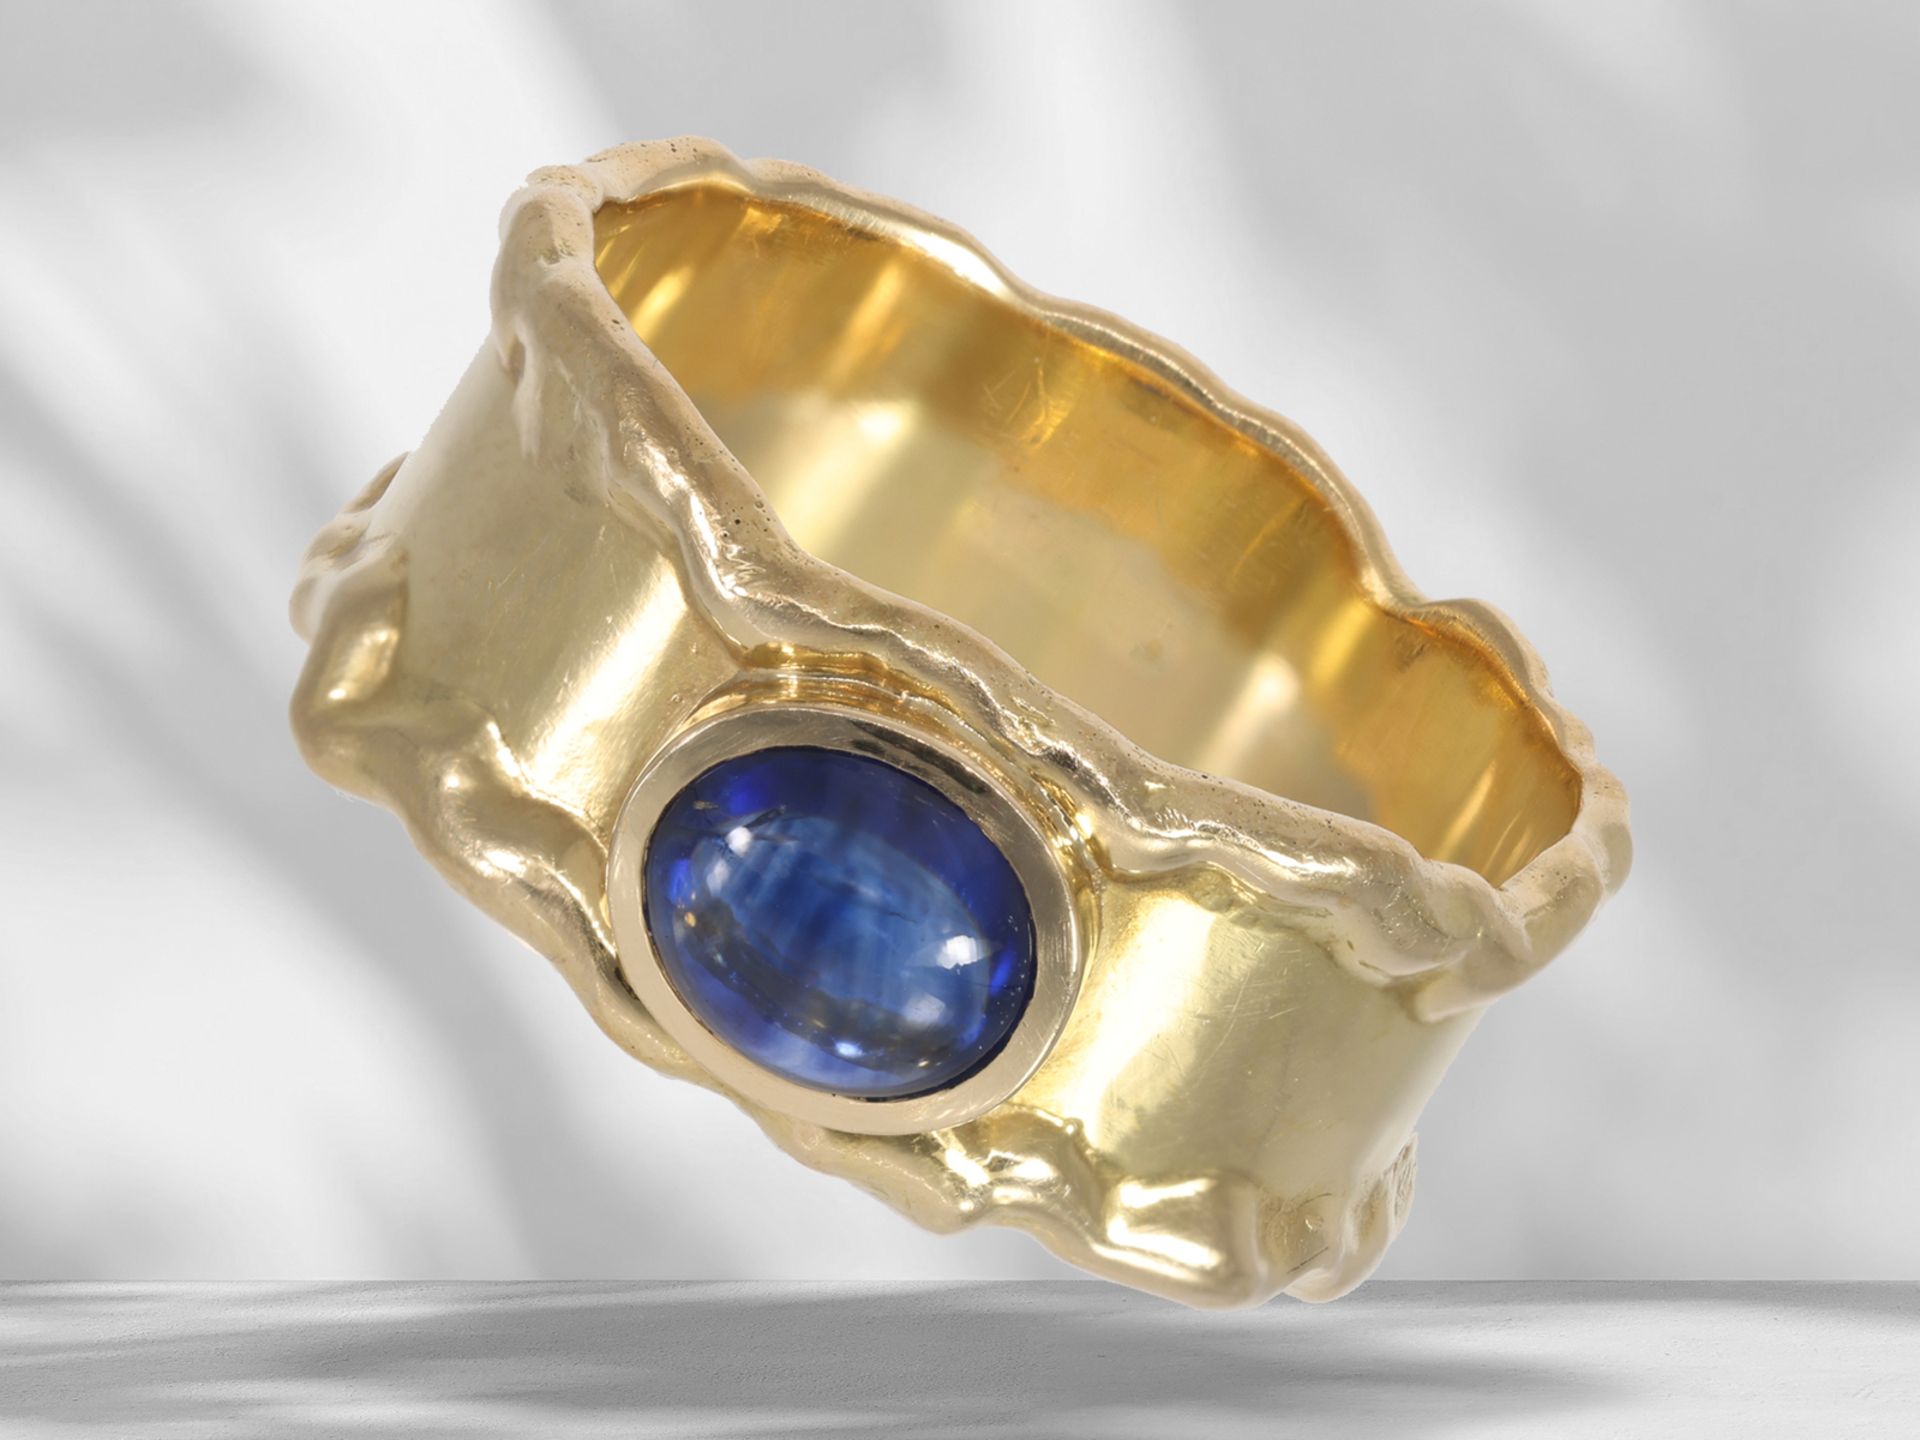 Ring: individual and interesting sapphire goldsmith ring, uniquely handcrafted from 18k yellow gold